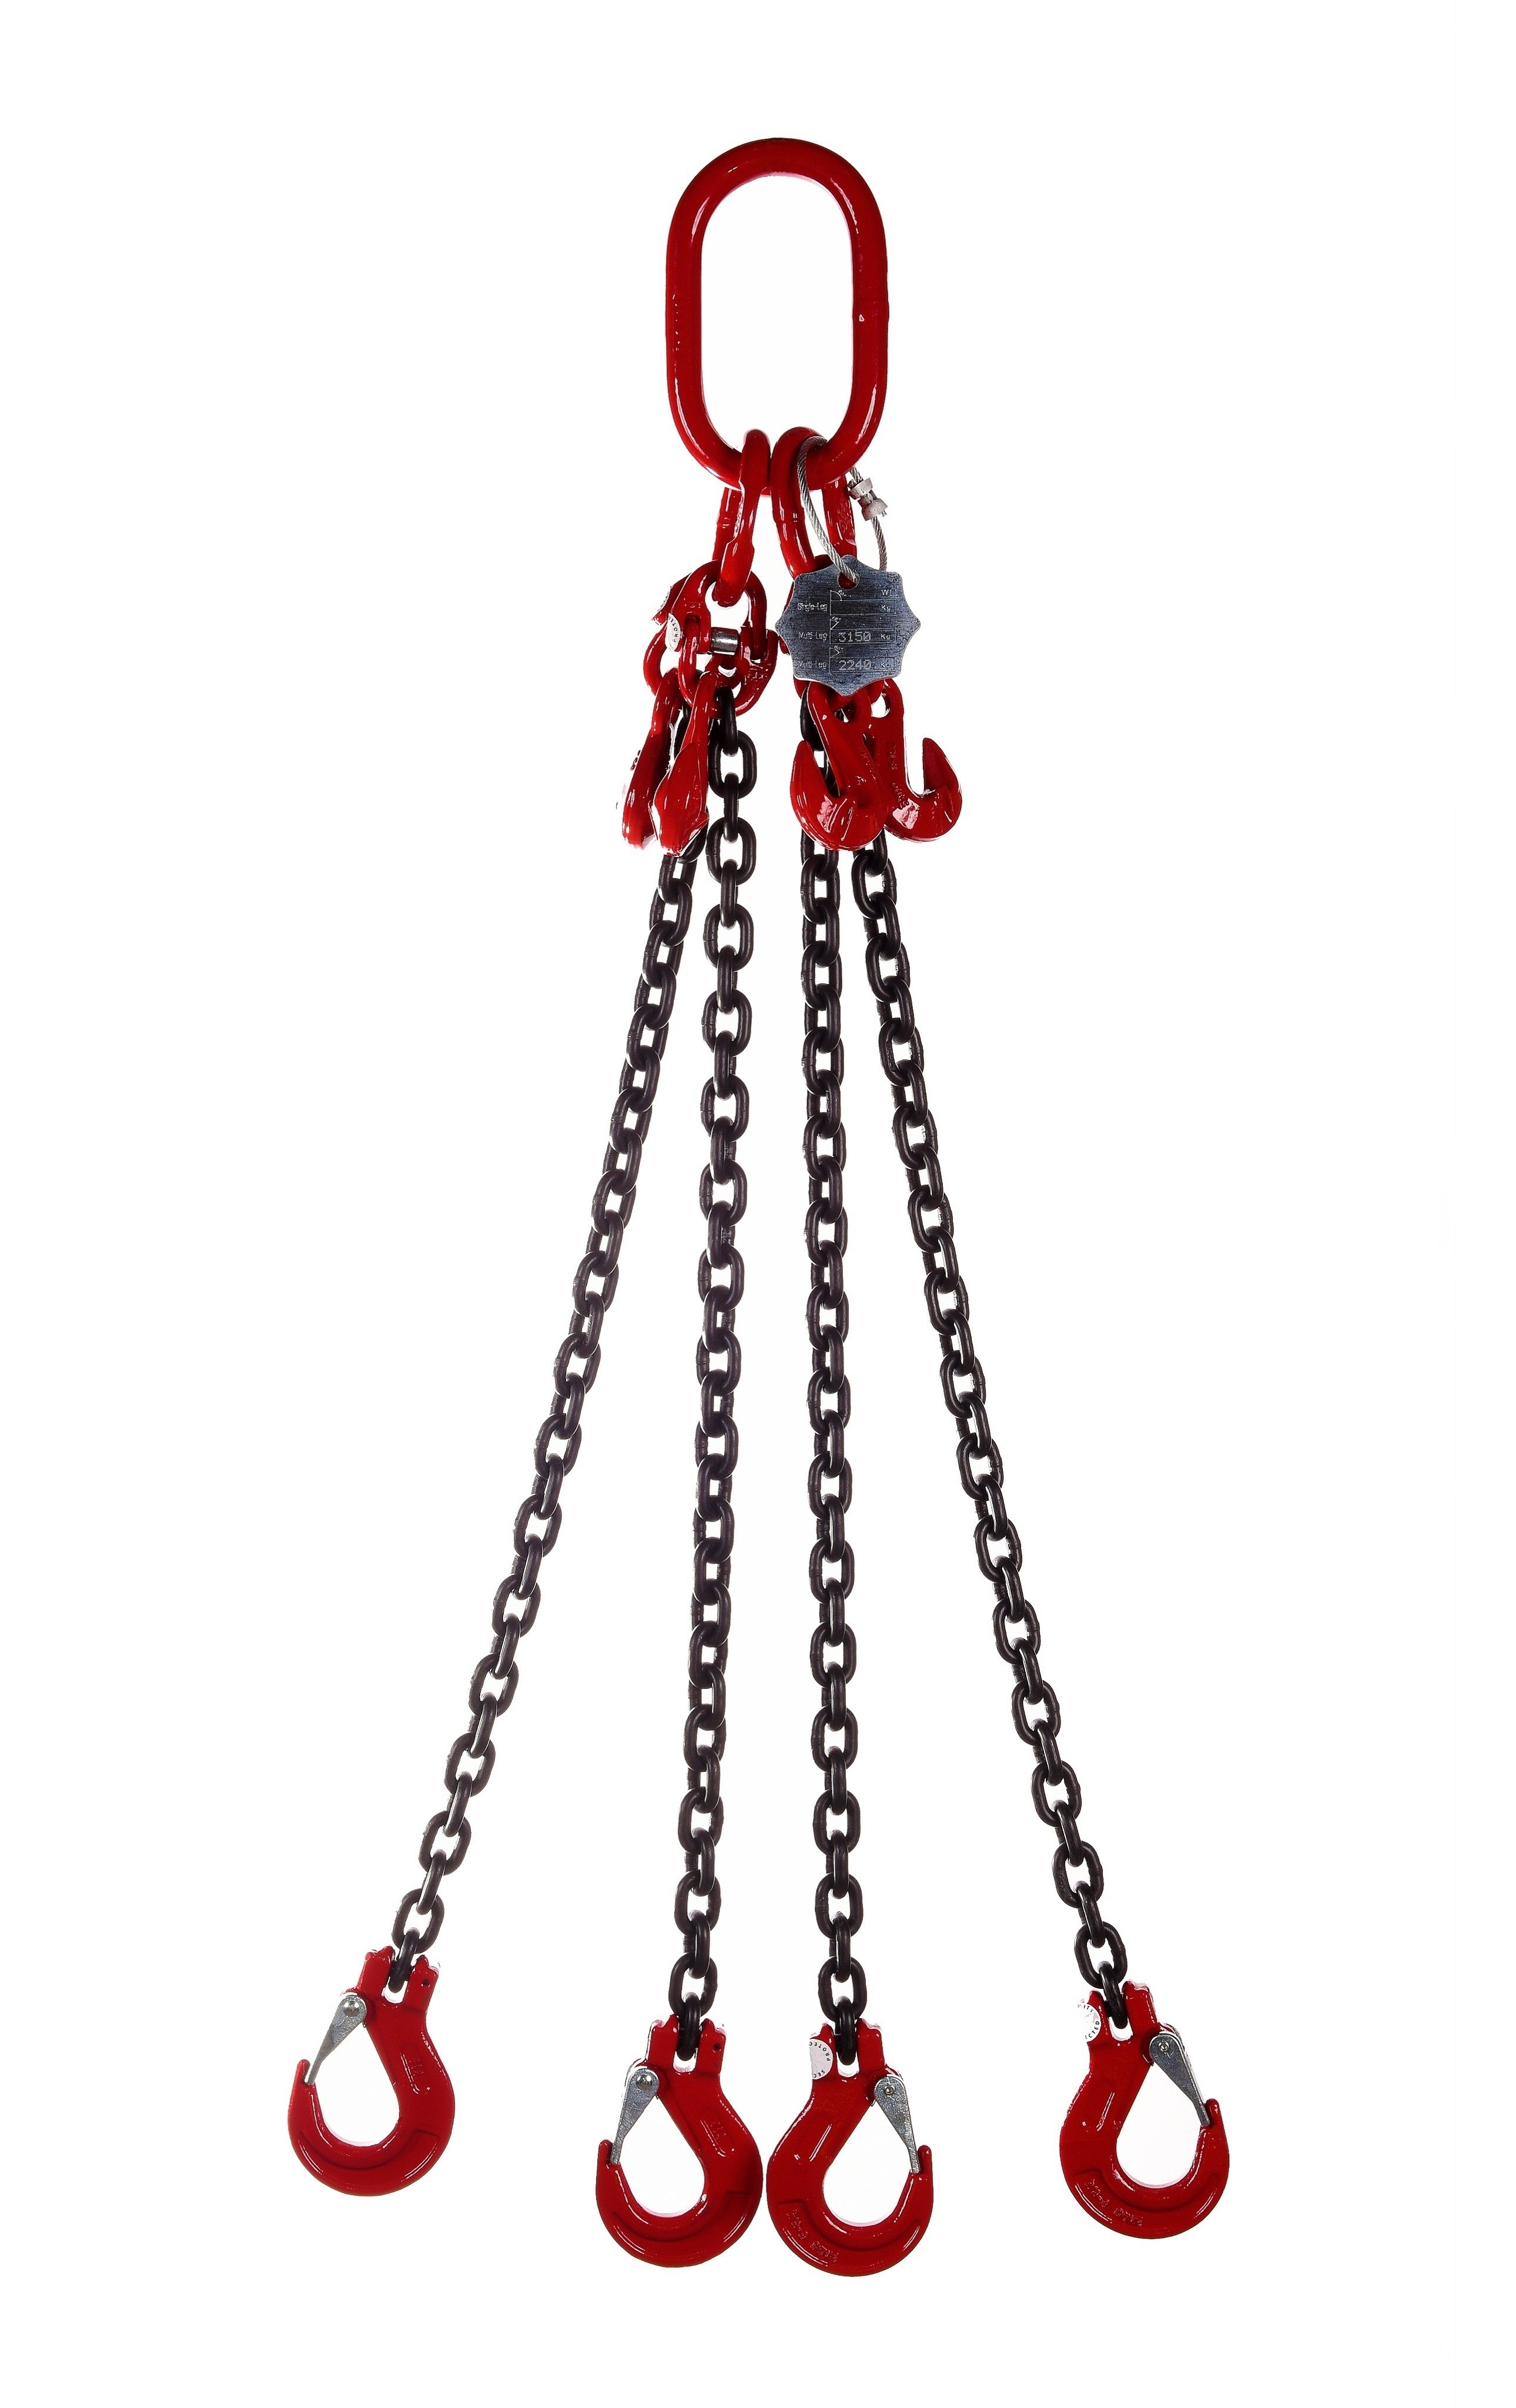 4 Leg 17.0tonne 16mm Lifting Chain Sling with choice of length and hooks – Without Shortening Hook – 1mtr – Clevis Sling Hook – Chain Slings – WSB